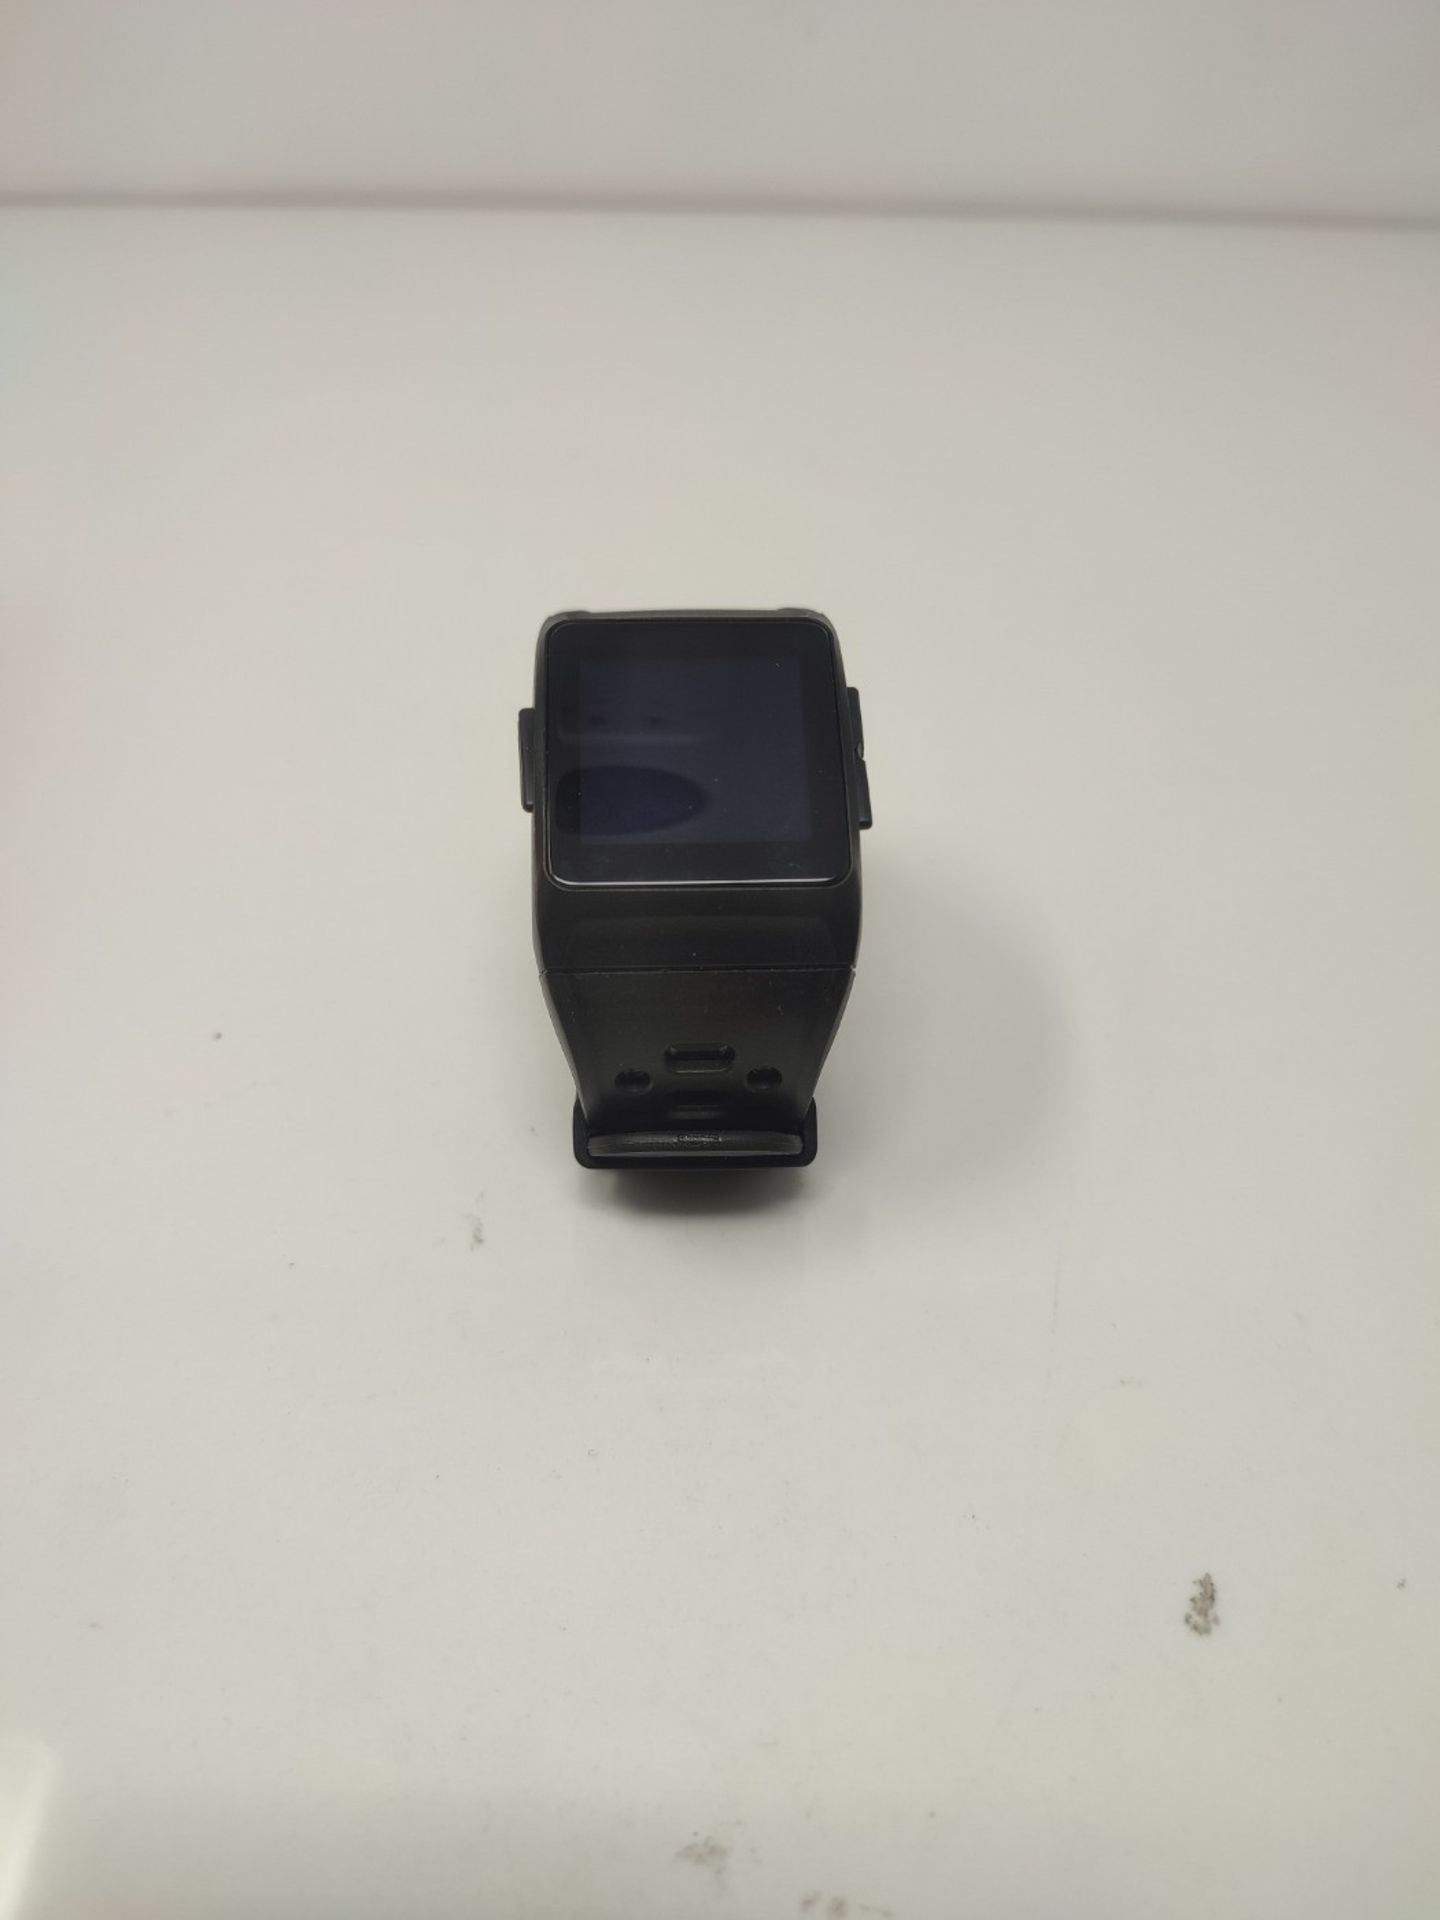 Wee'Plug Unisex Explorer 3S Black Connect E GPS Watch, Black - Bluetooth - IP68 waterp - Image 2 of 3